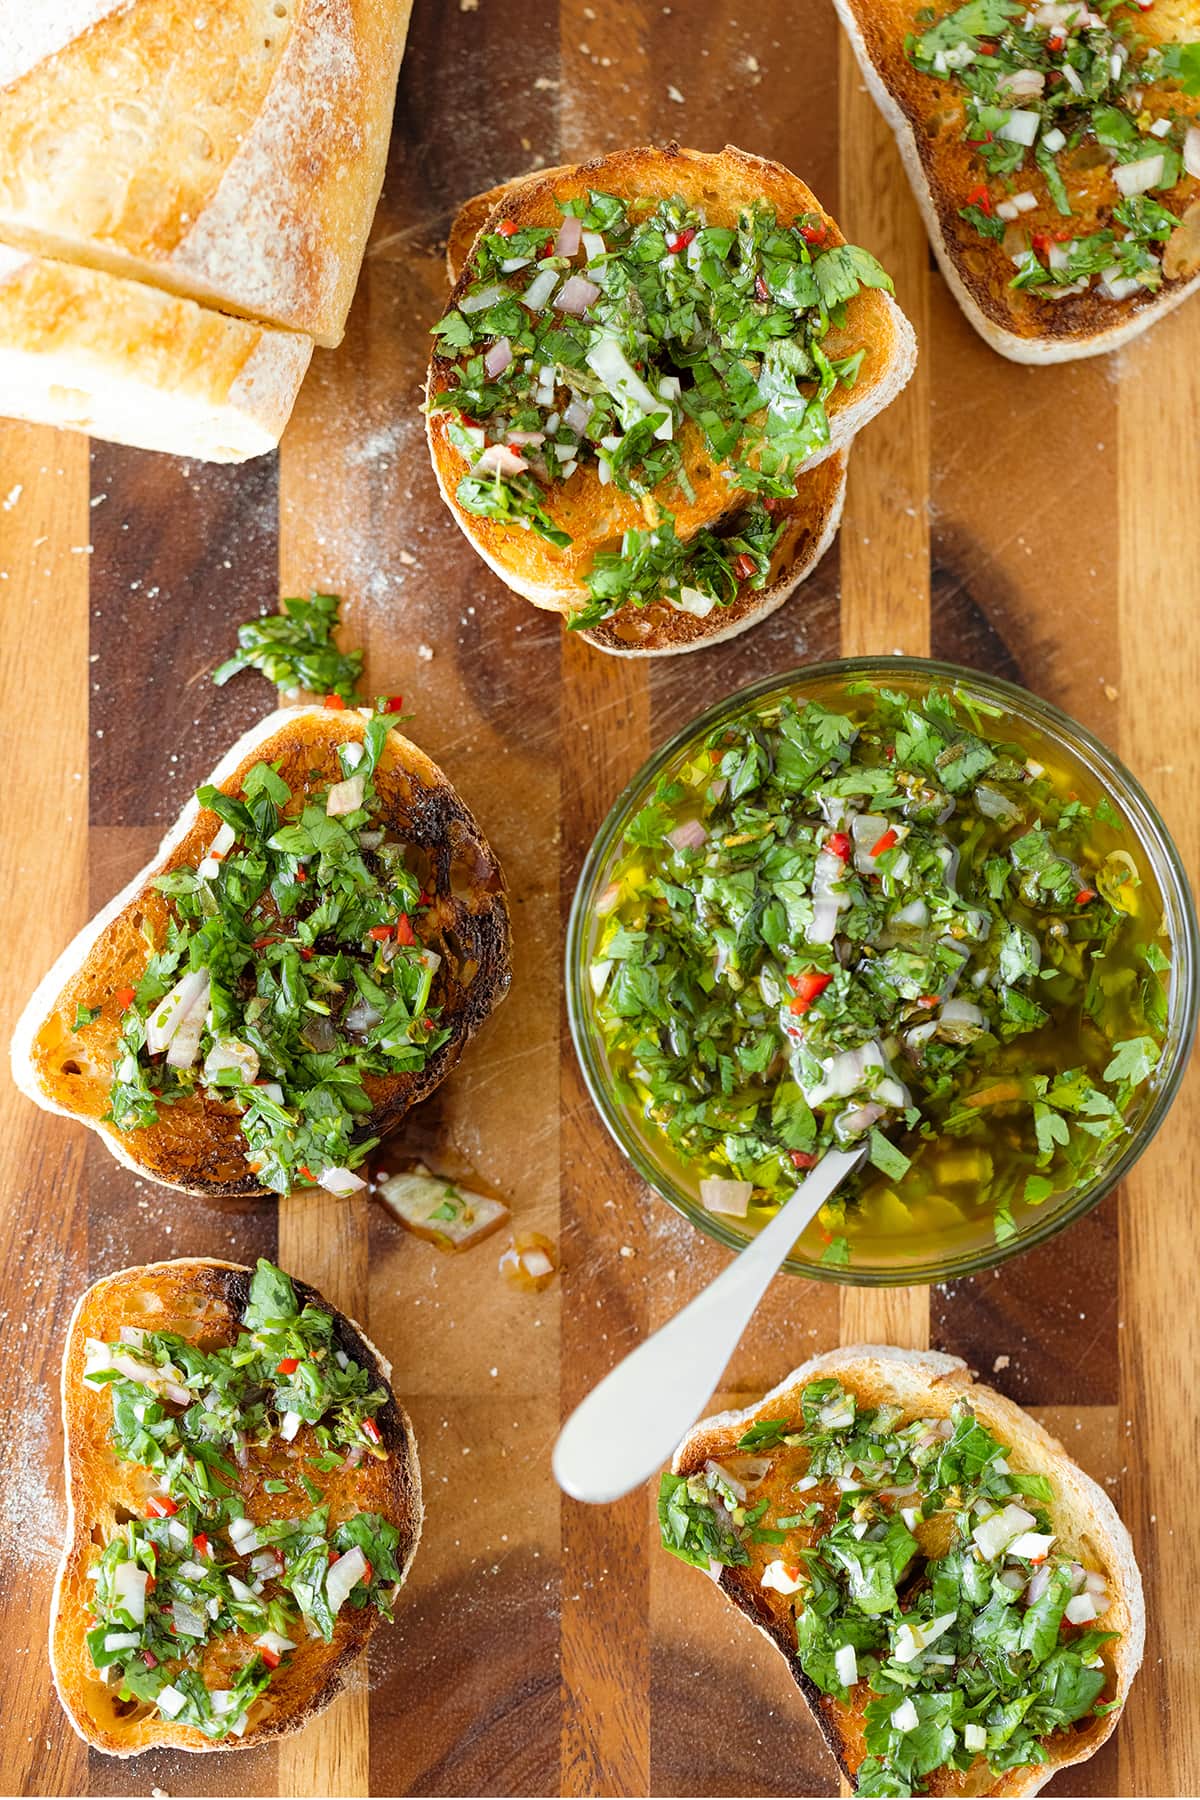 Sliced toasted baguette on a wooden cutting board, with chimichurri sauce in a glass bowl